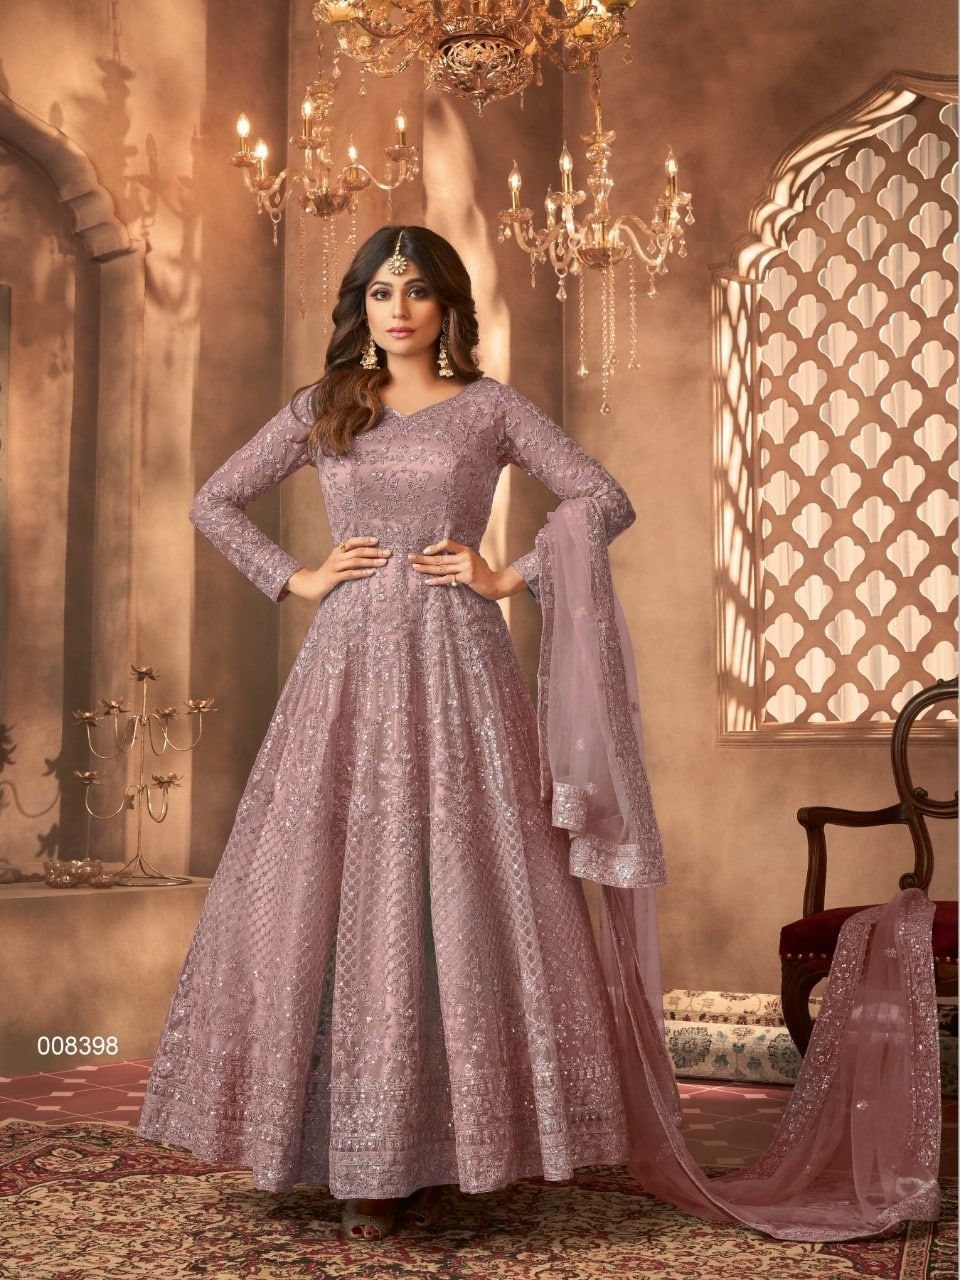 Net Womens Gowns - Buy Net Womens Gowns Online at Best Prices In India |  Flipkart.com